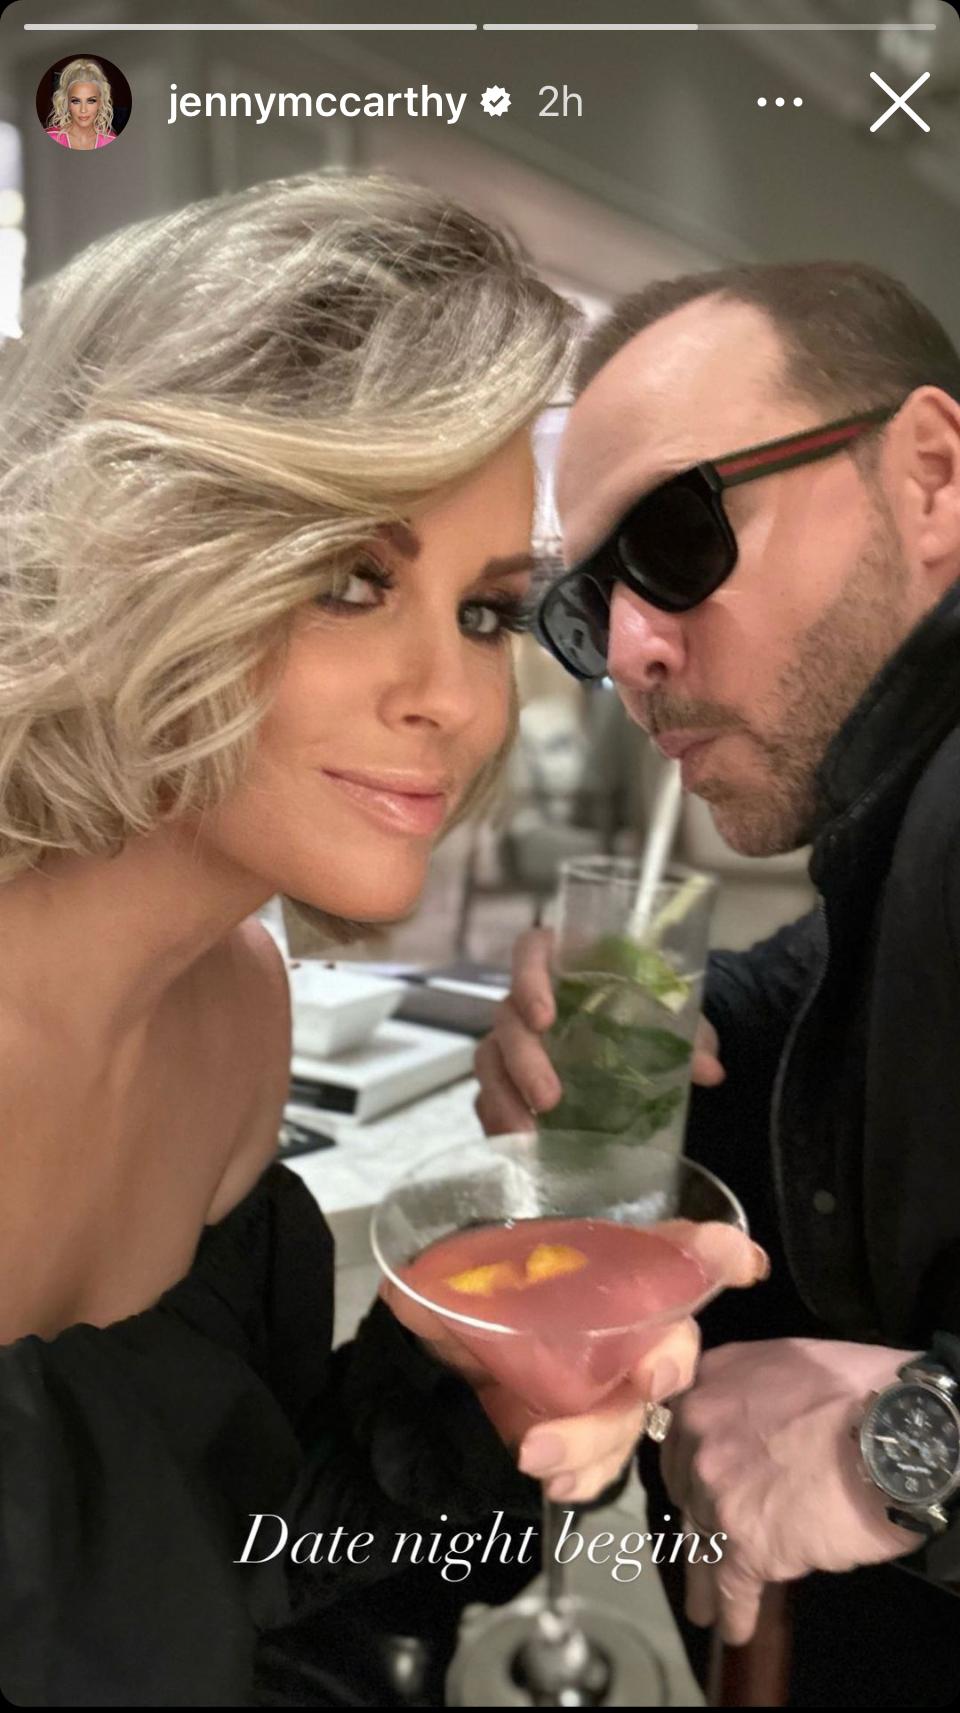 Jenny McCarthy and Donnie Wahlberg's date night